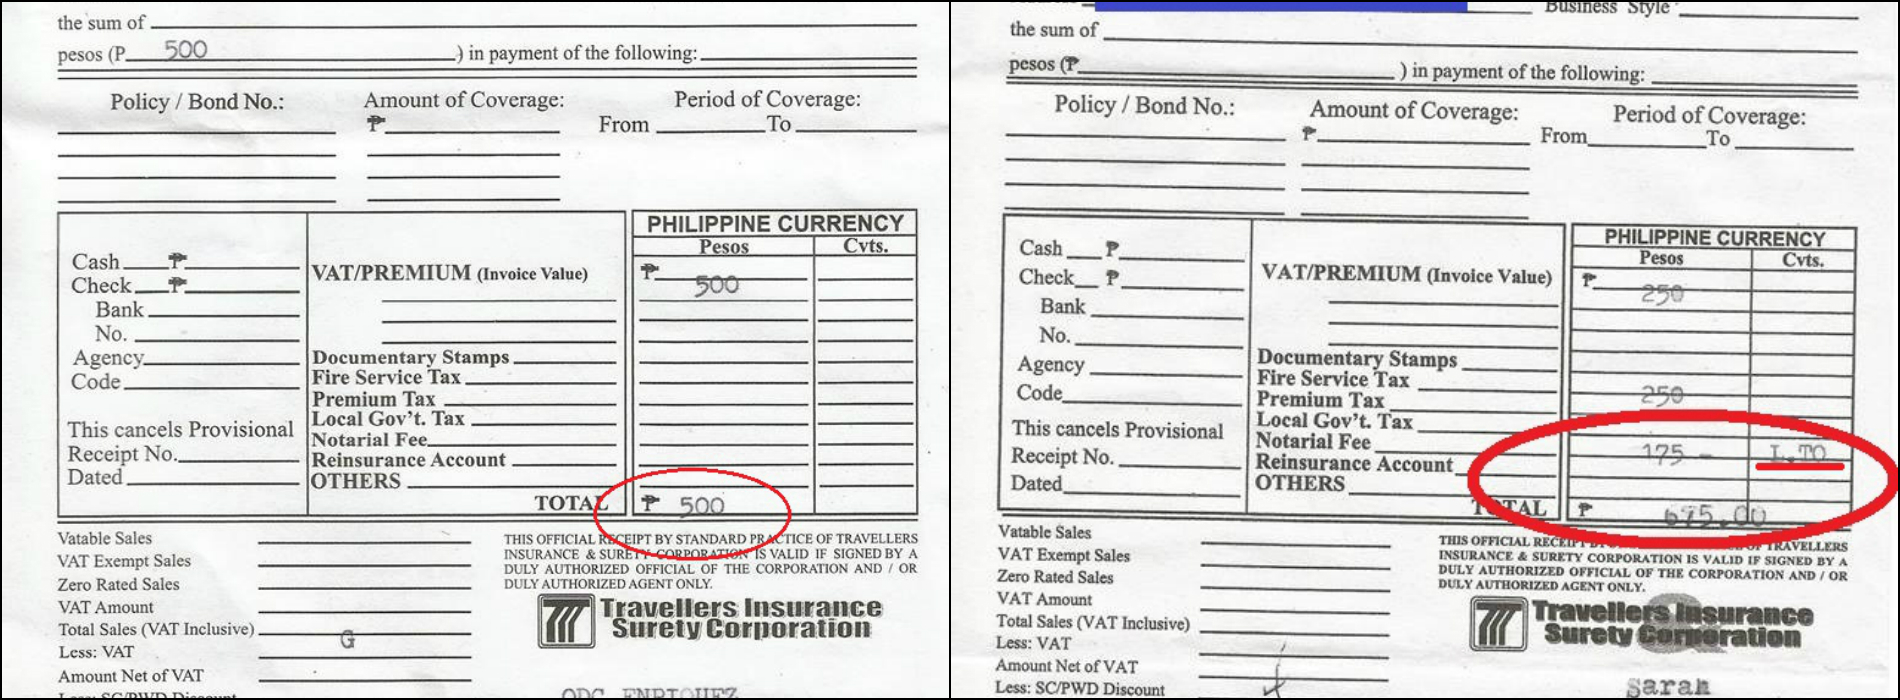 Motorist Overcharged For Lto Registration Insurance Policy inside dimensions 1900 X 700